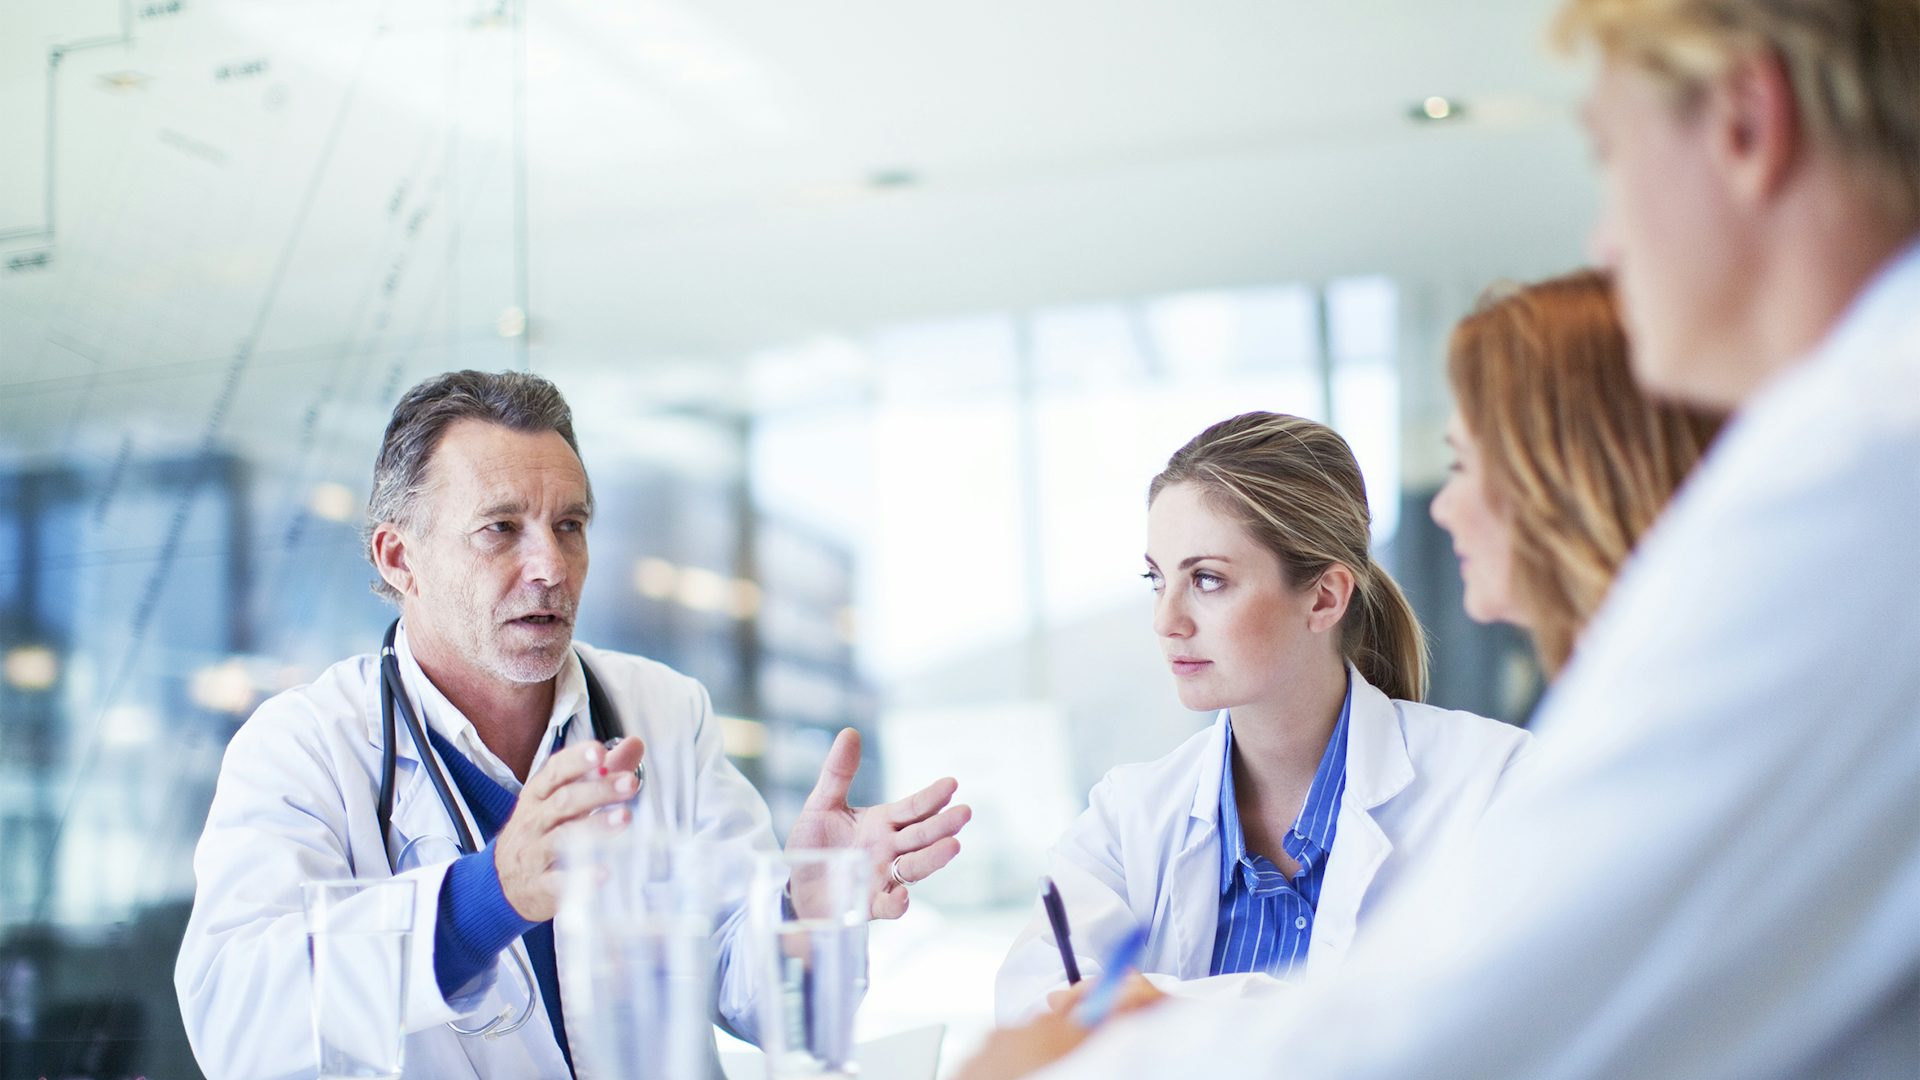 A male doctor talks to three colleagues, two of which are out of focus.